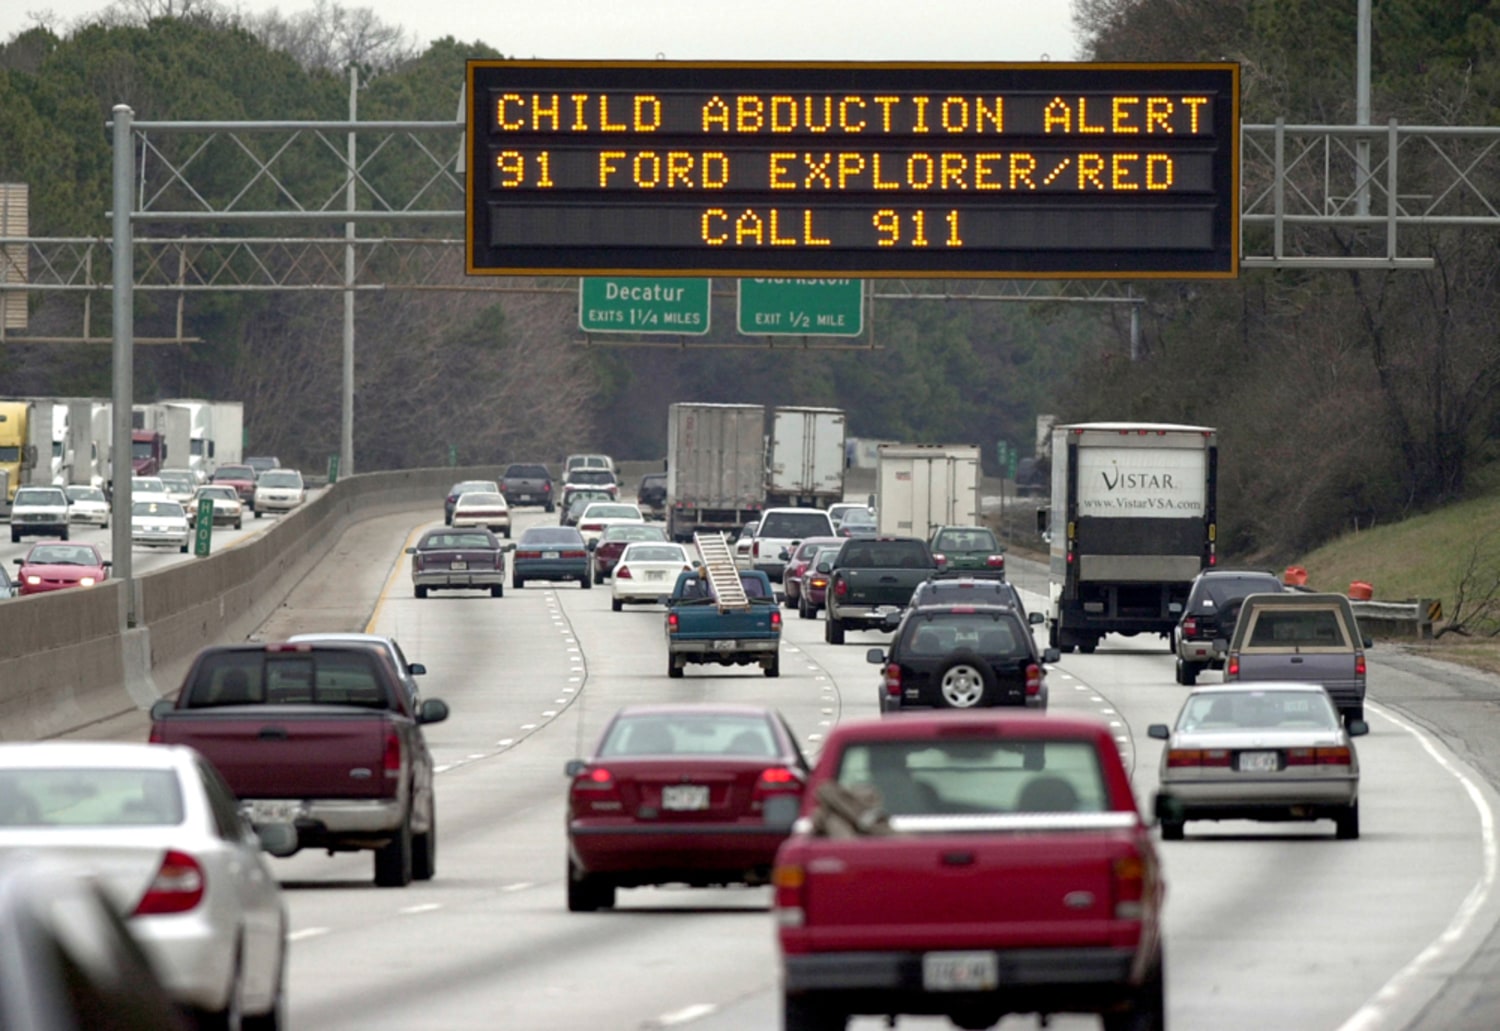 Amber Alert systems vary greatly by state